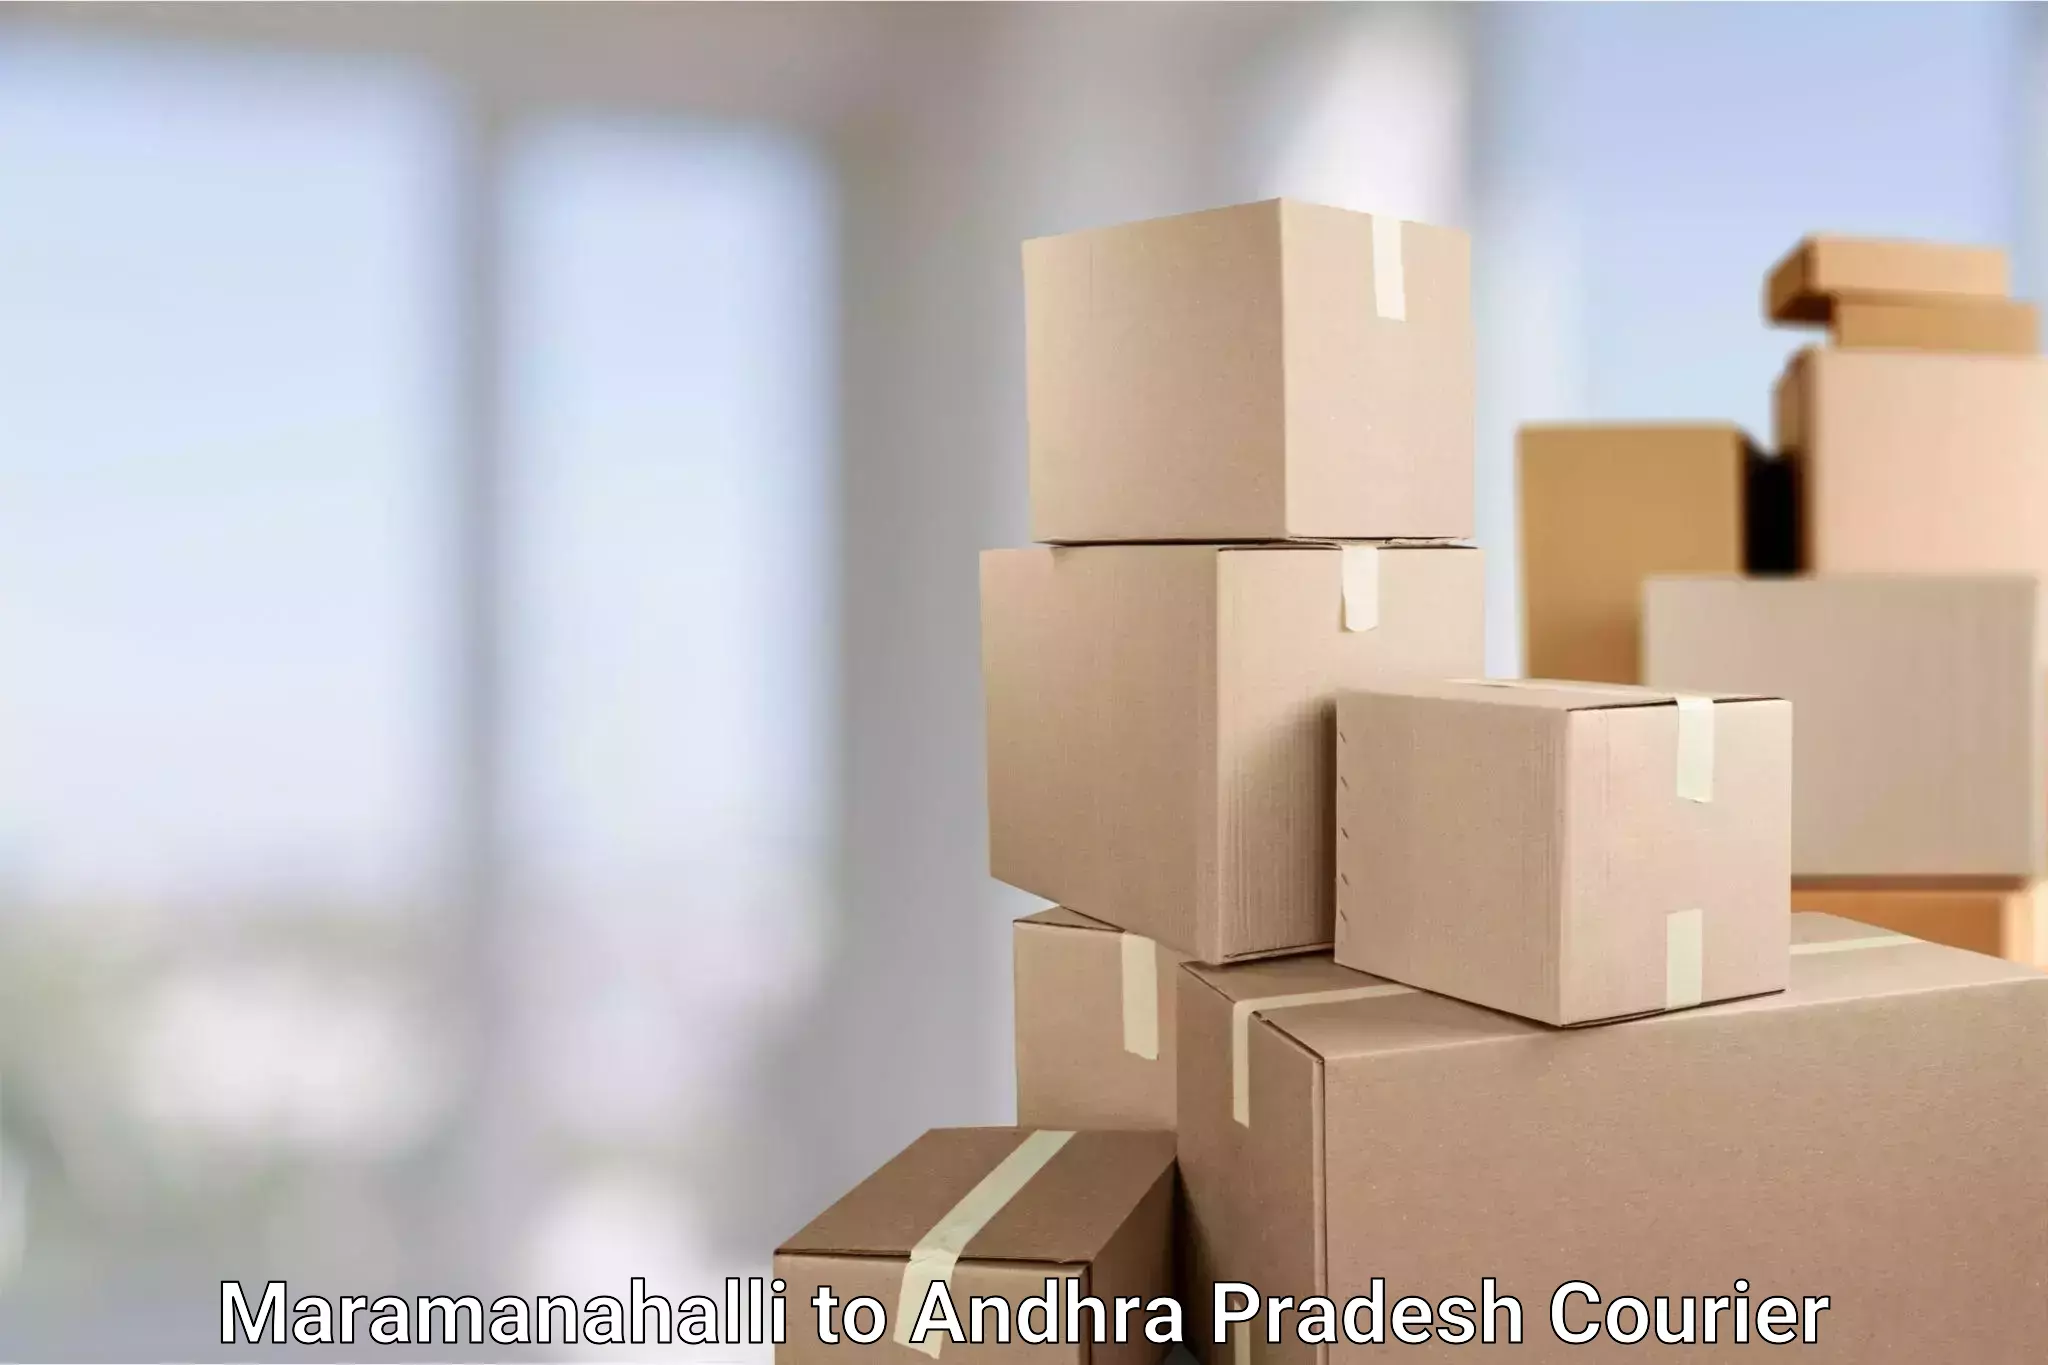 Overnight delivery services in Maramanahalli to Mantada